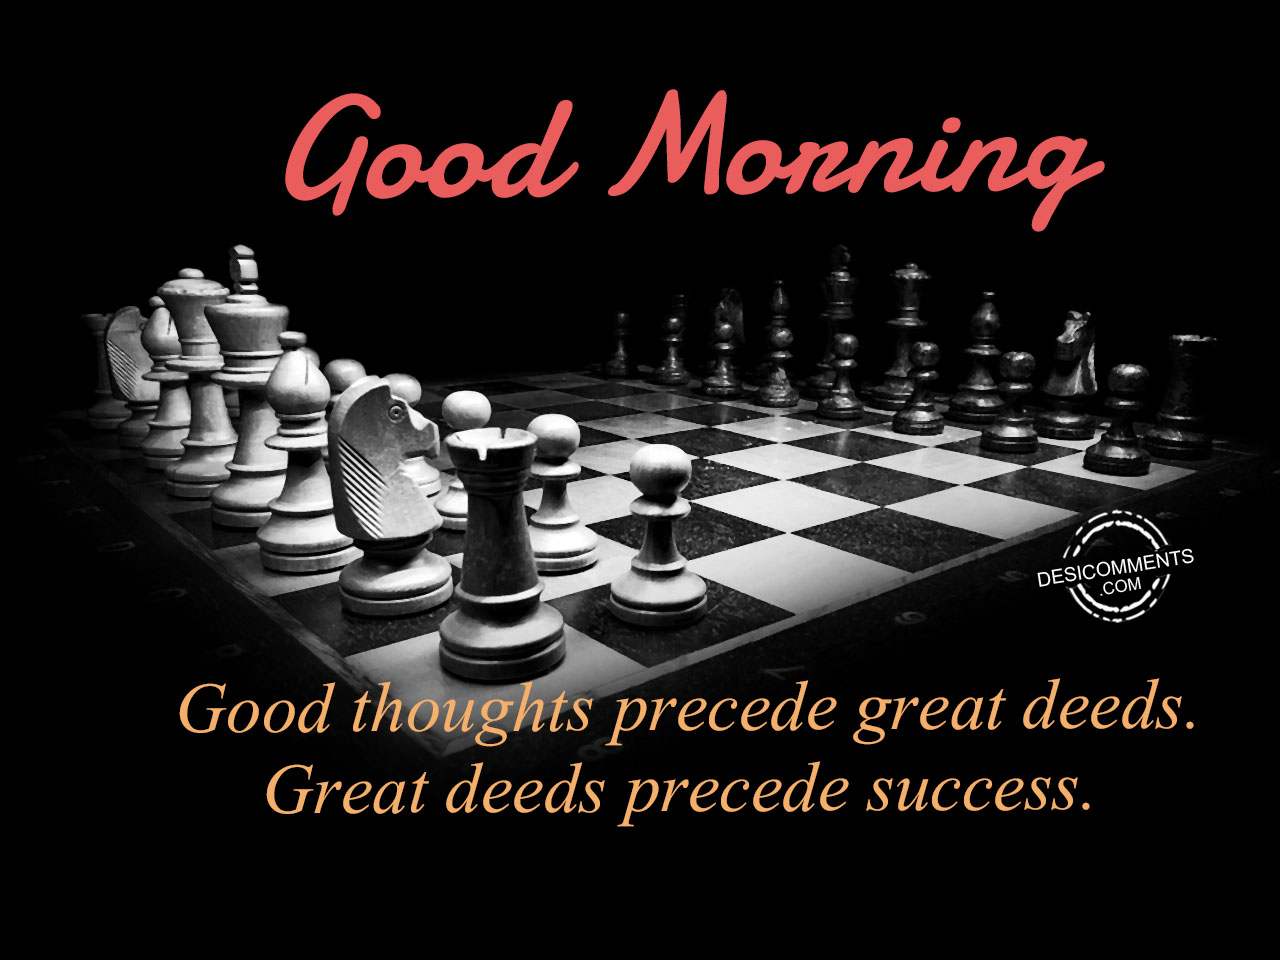 Good Morning – Good Thoughts - DesiComments.com